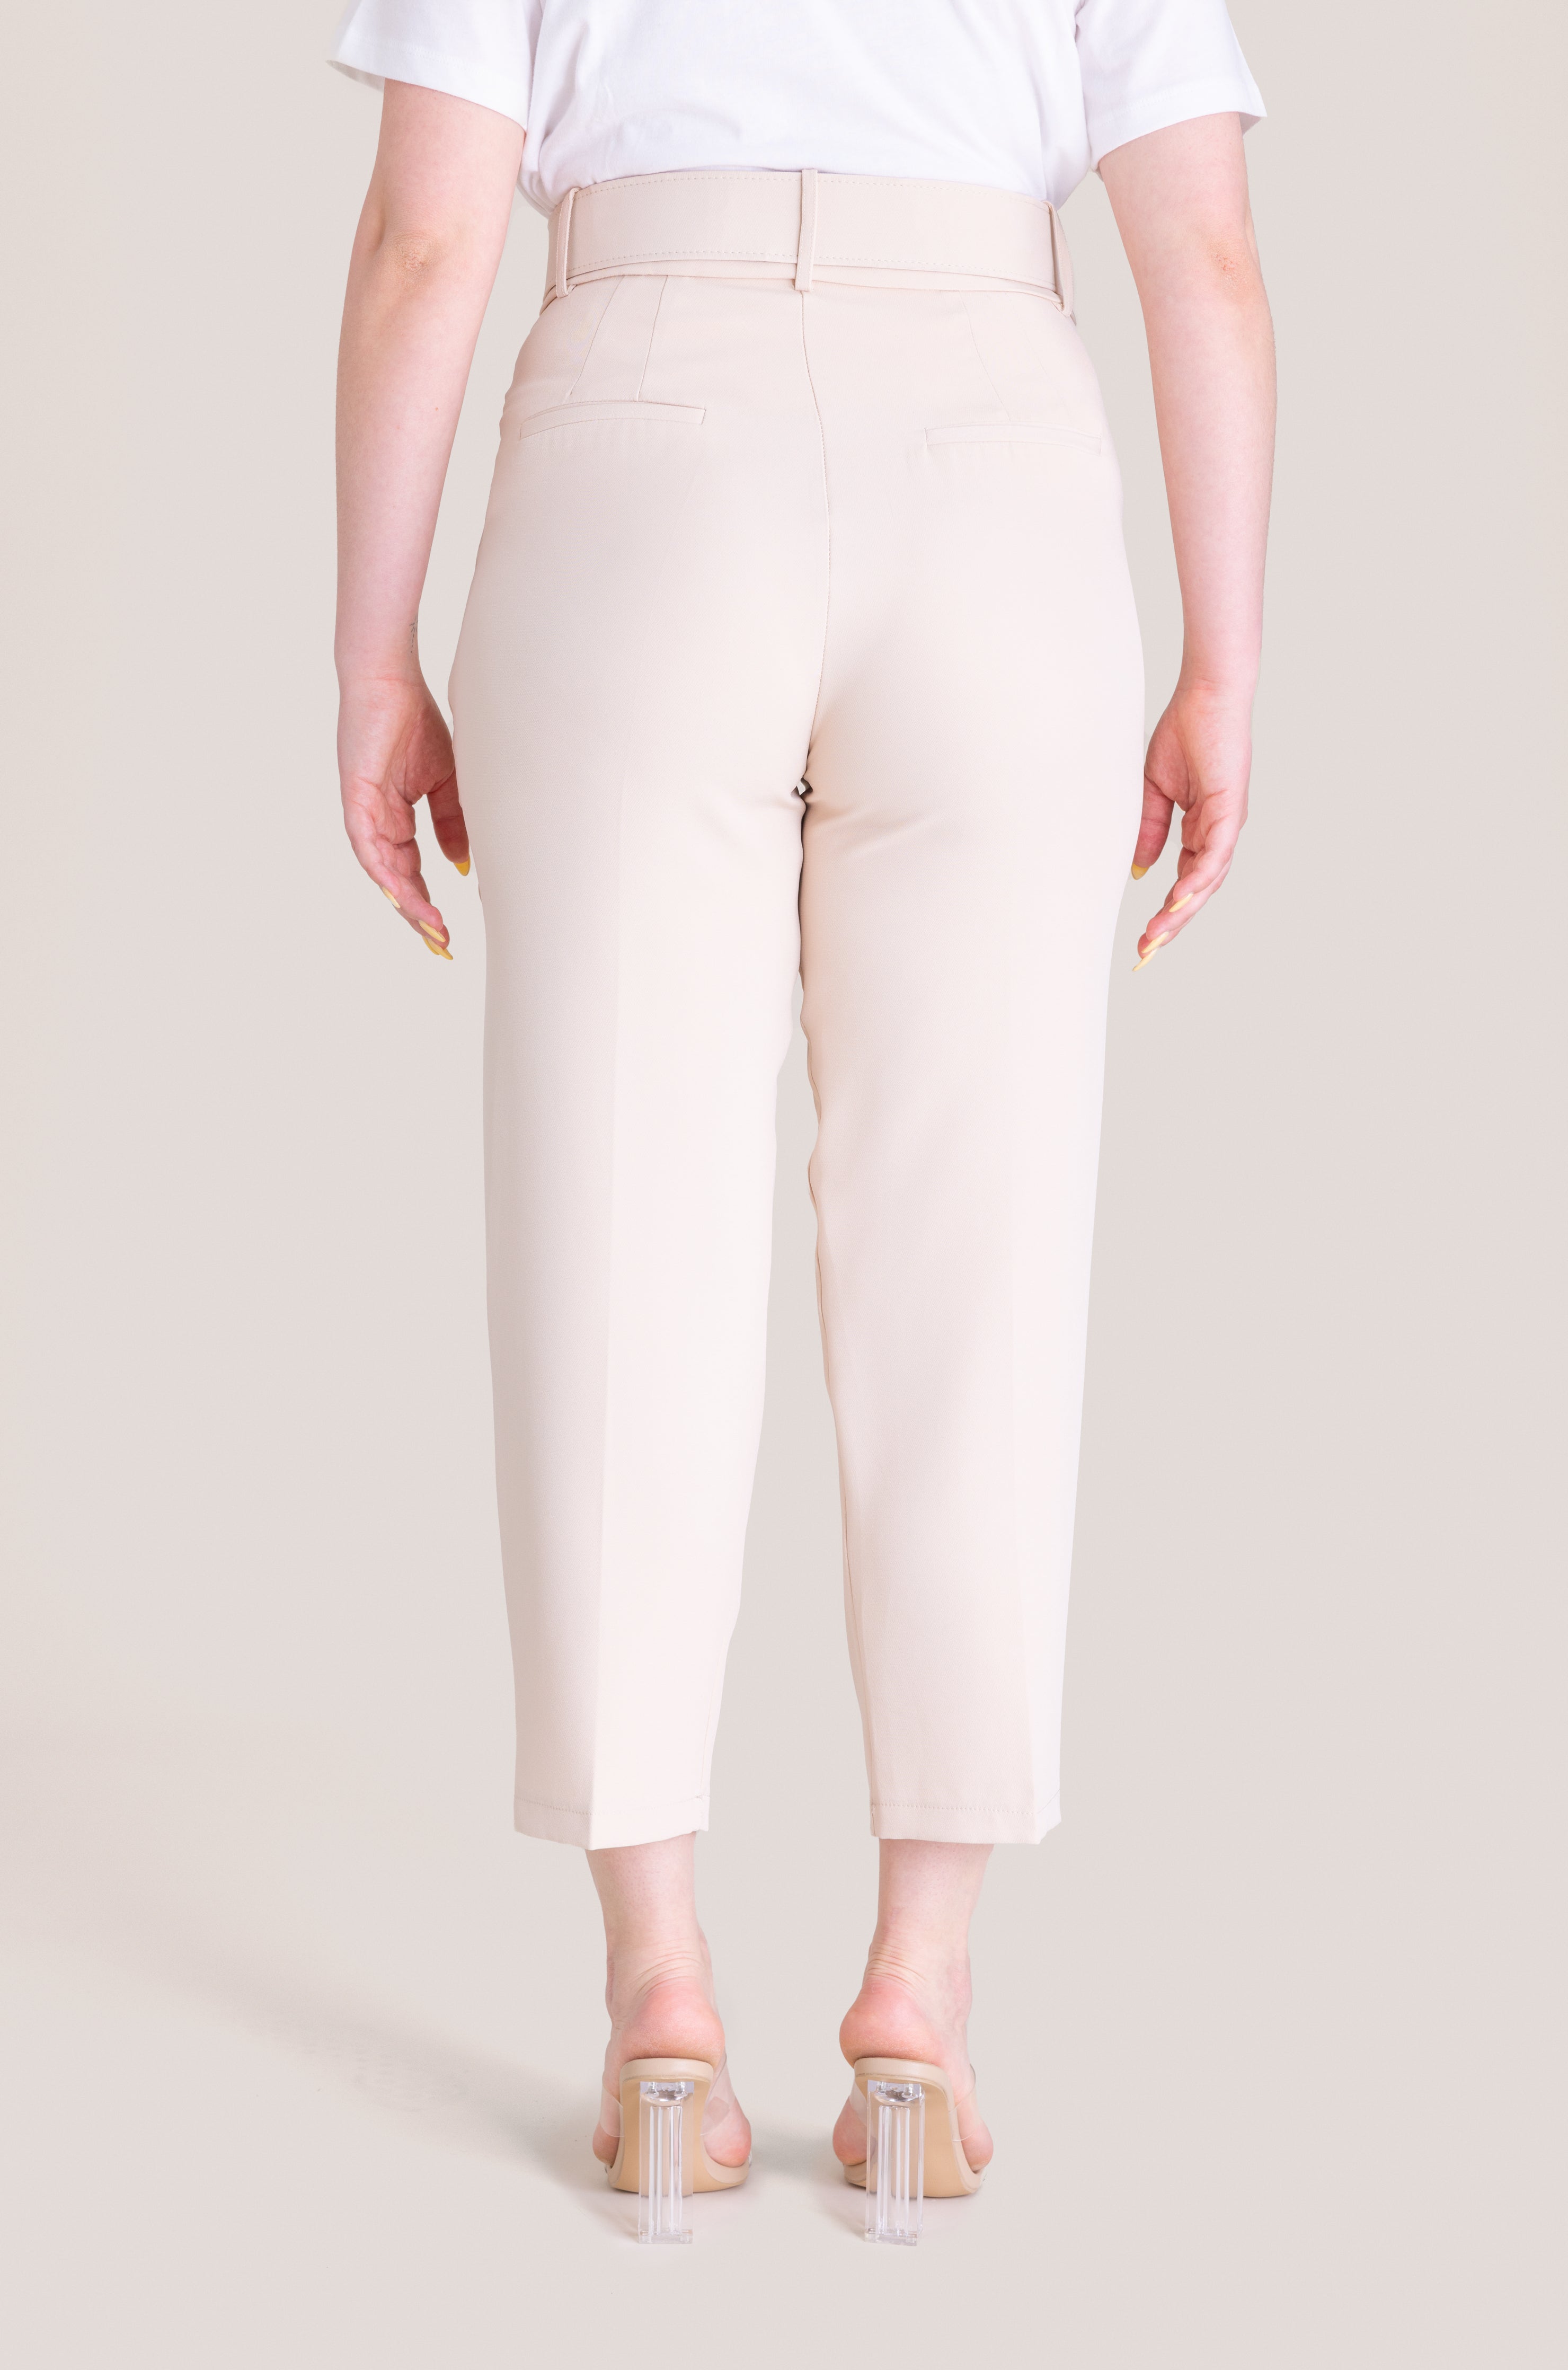 High-Waist Belted Casual Pant - Cream White